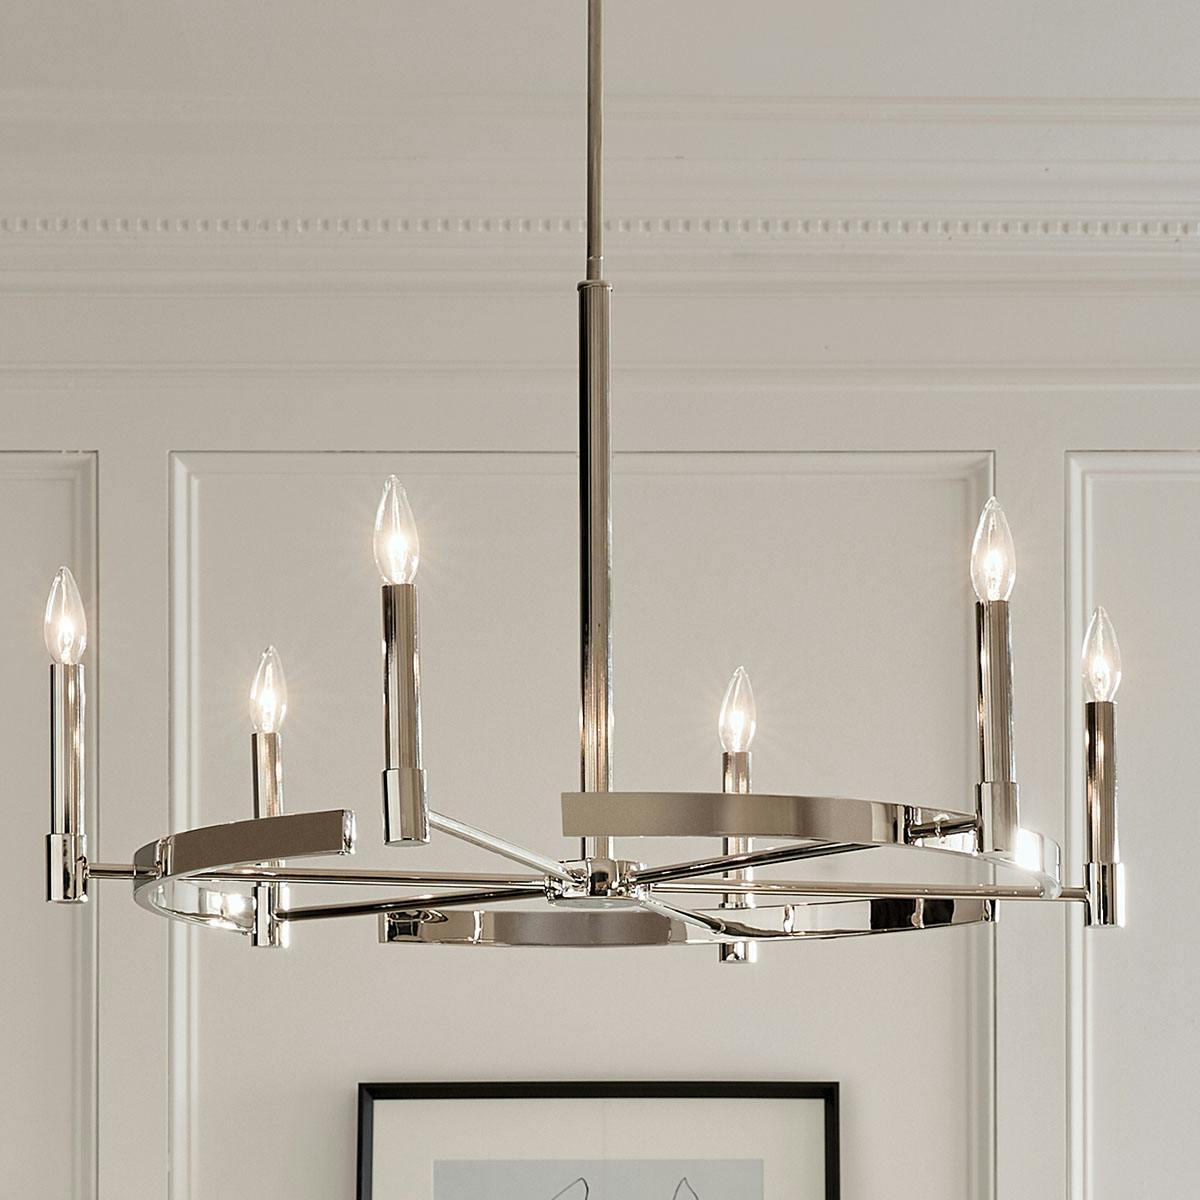 Day time Dining Room image featuring Tolani chandelier 52427PN